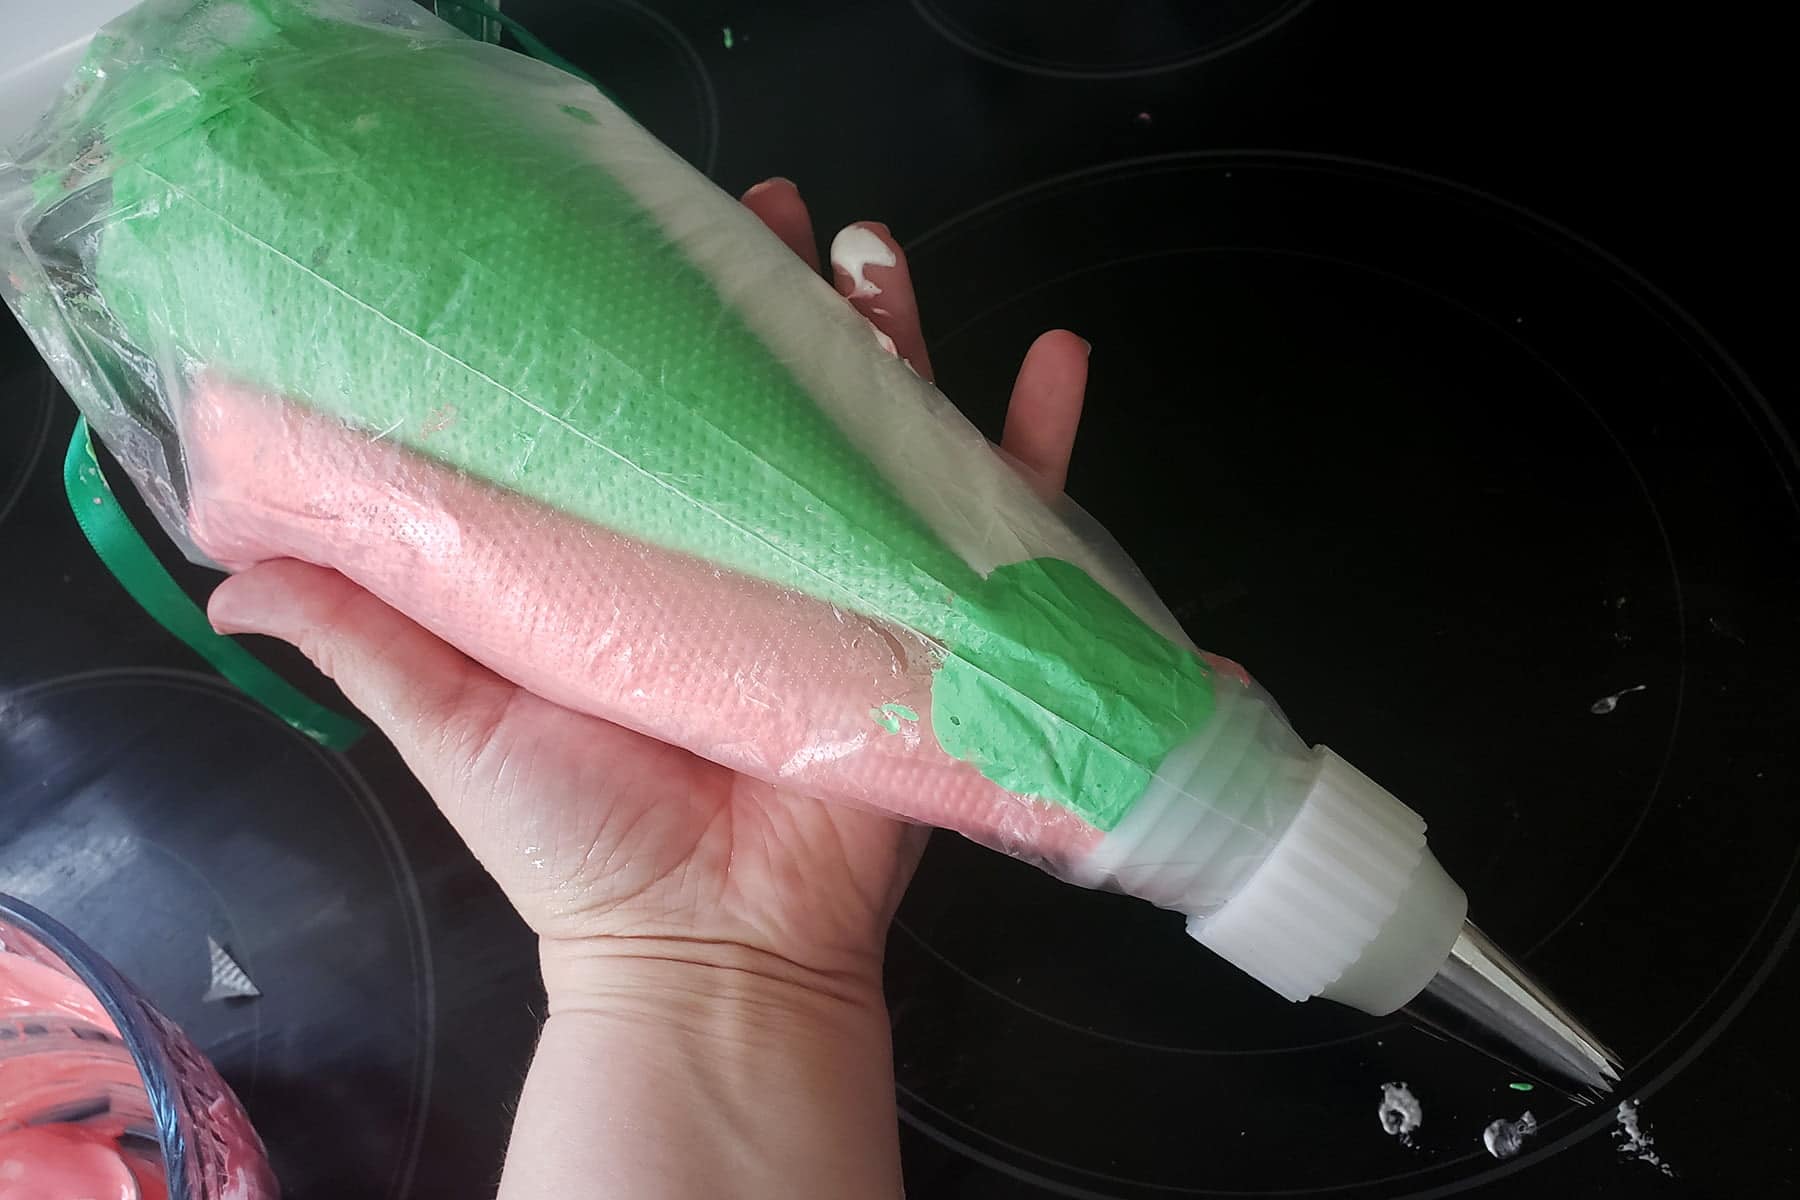 A hand holds a pastry bag filled with 3 other pastry bags, holding pink, white, and green meringues.